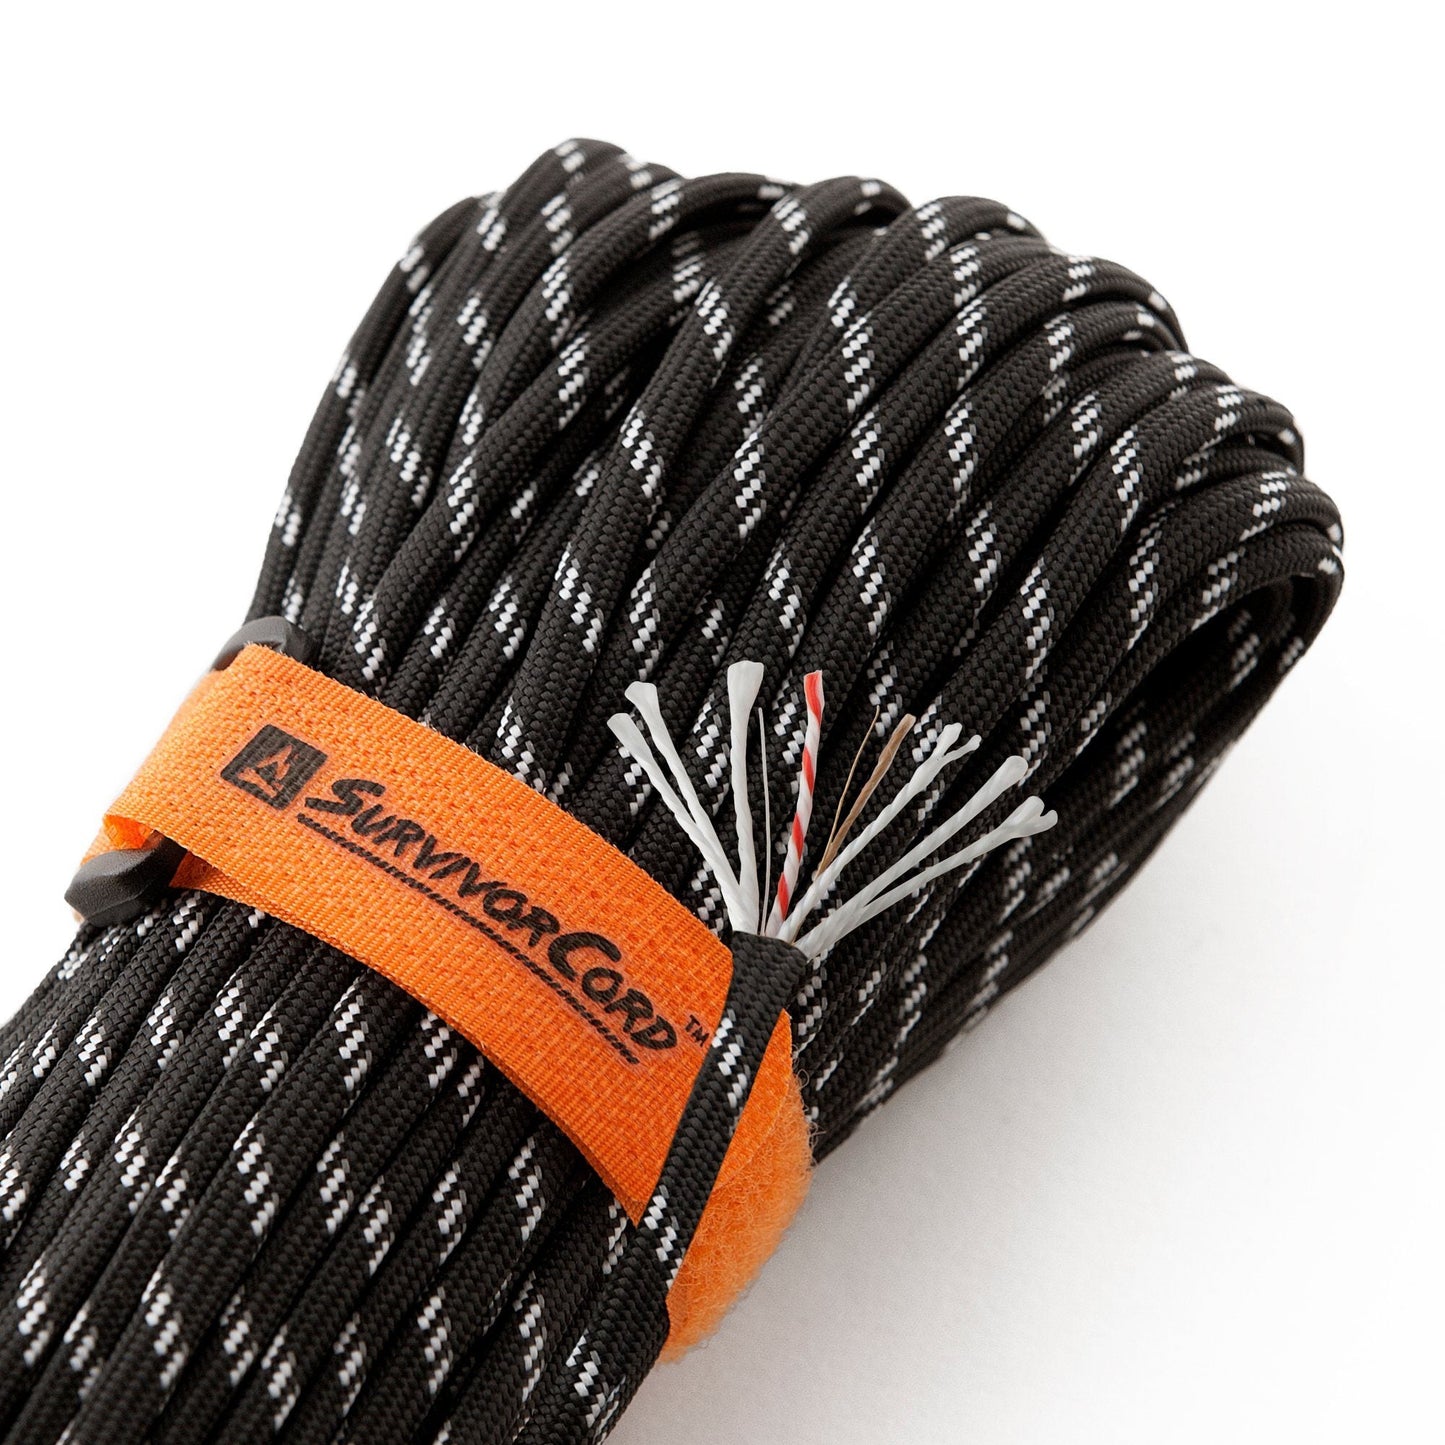 Detail of ACU reflective-black SurvivorCord with cord construction exposed and visible identification tags